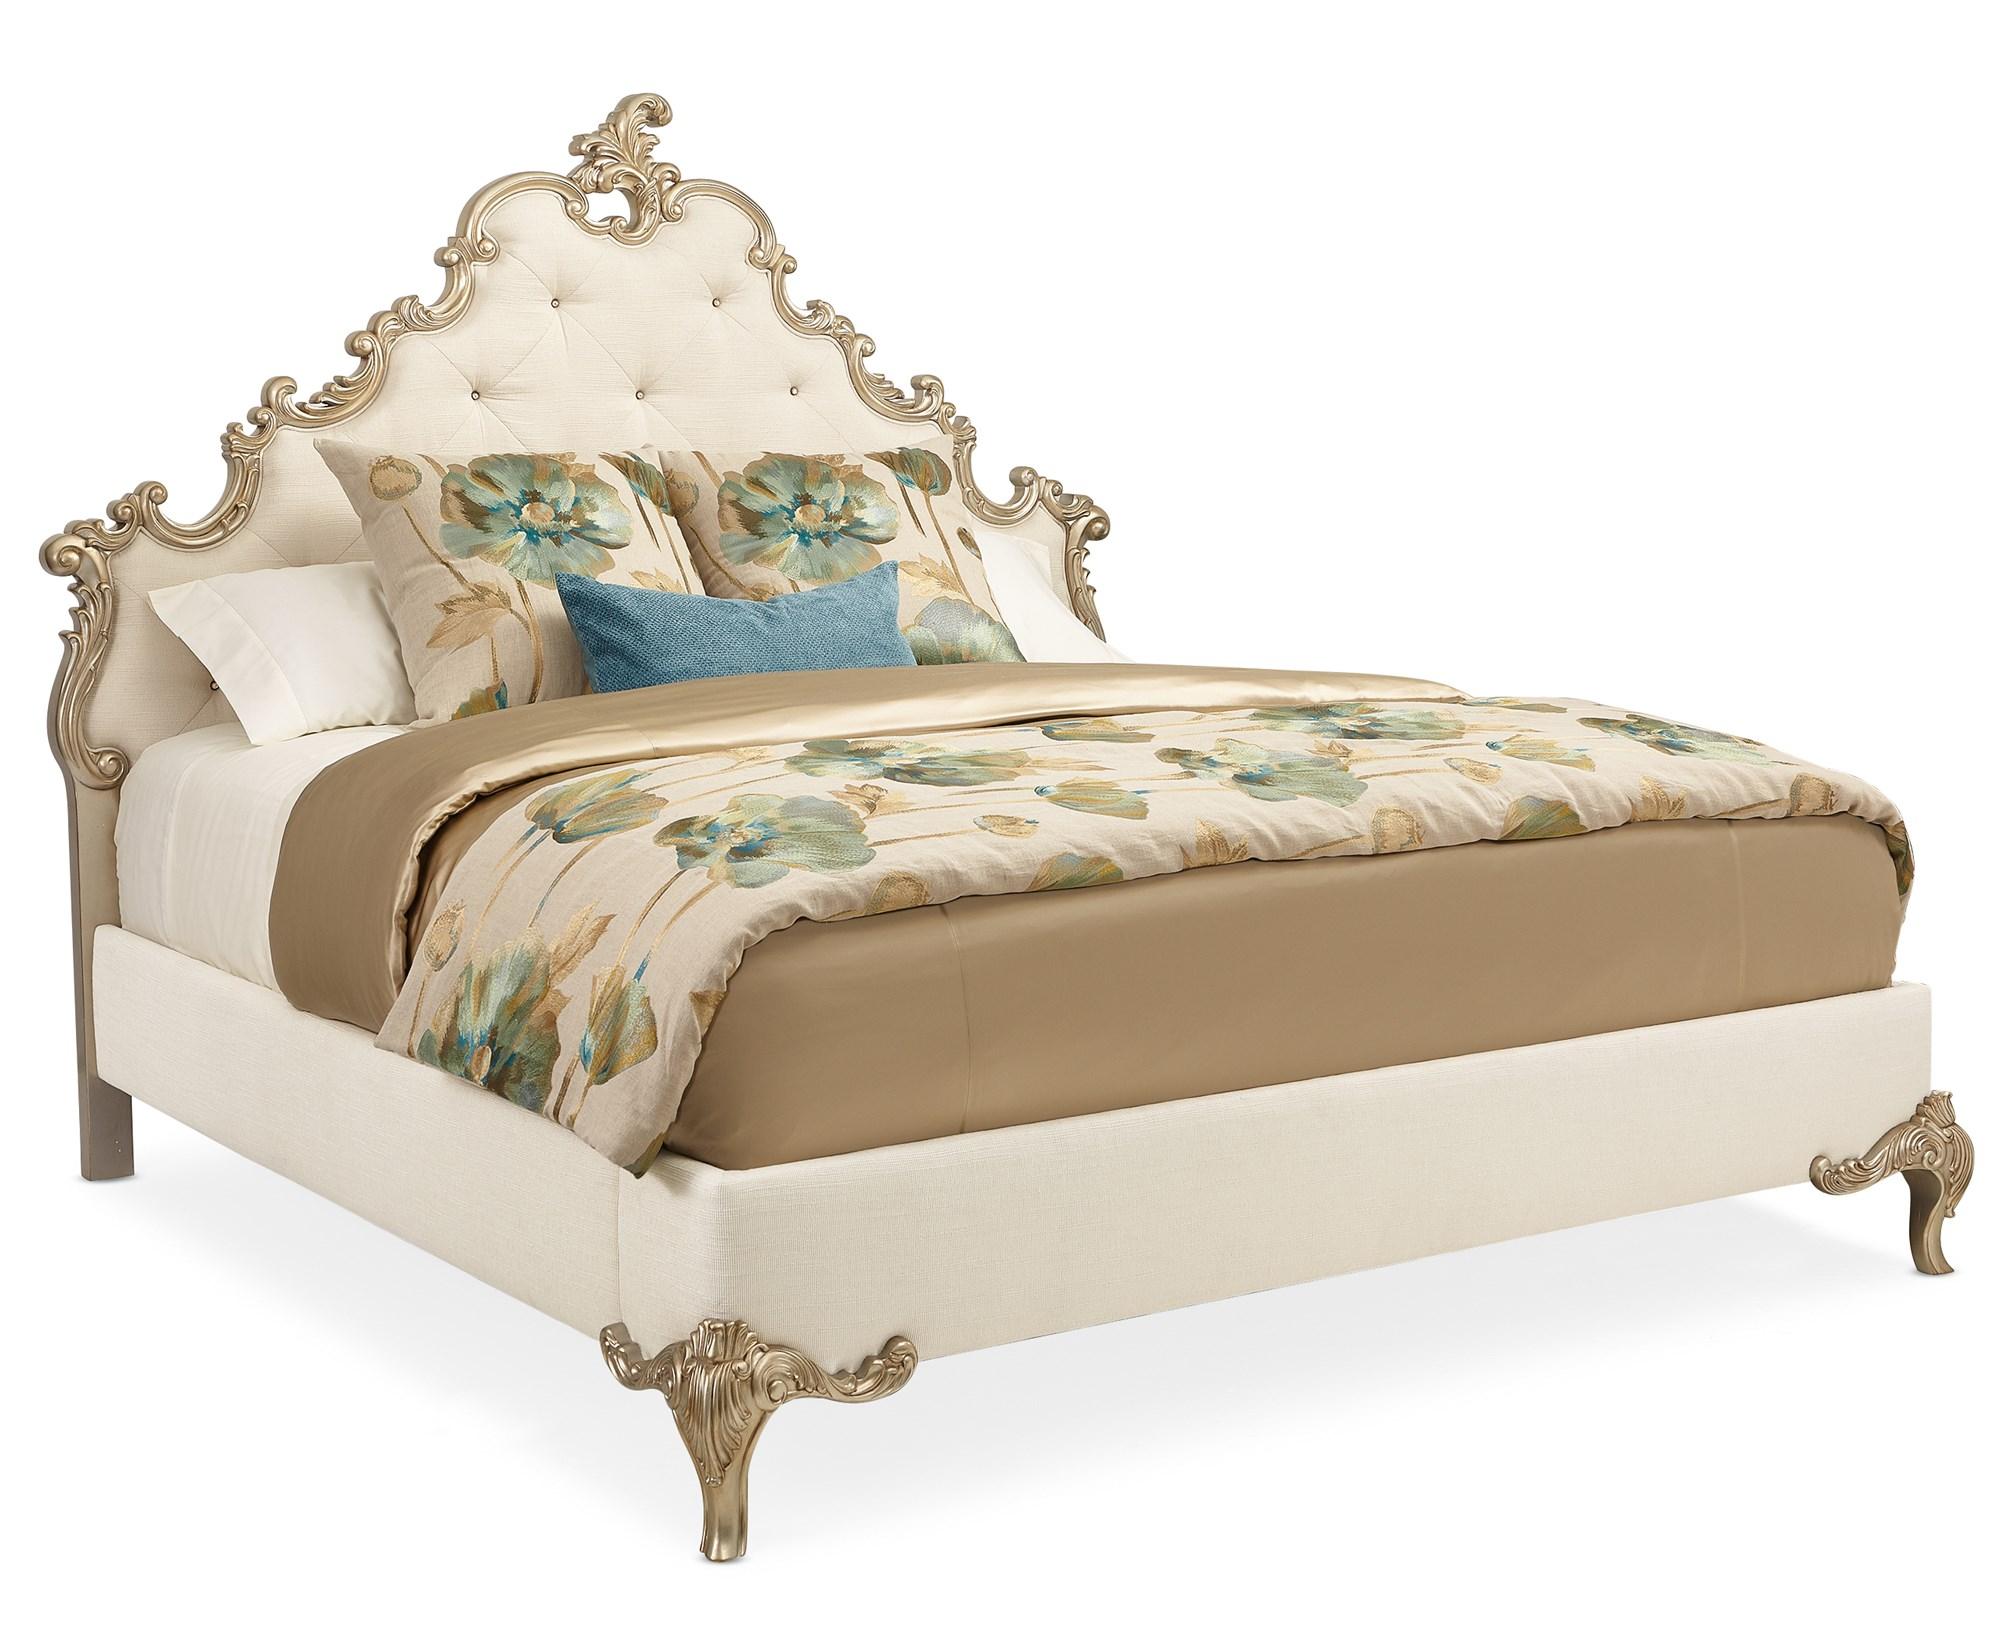 Traditional Panel Bed FONTAINEBLEAU C063-419-121 in Cream, Gold Fabric